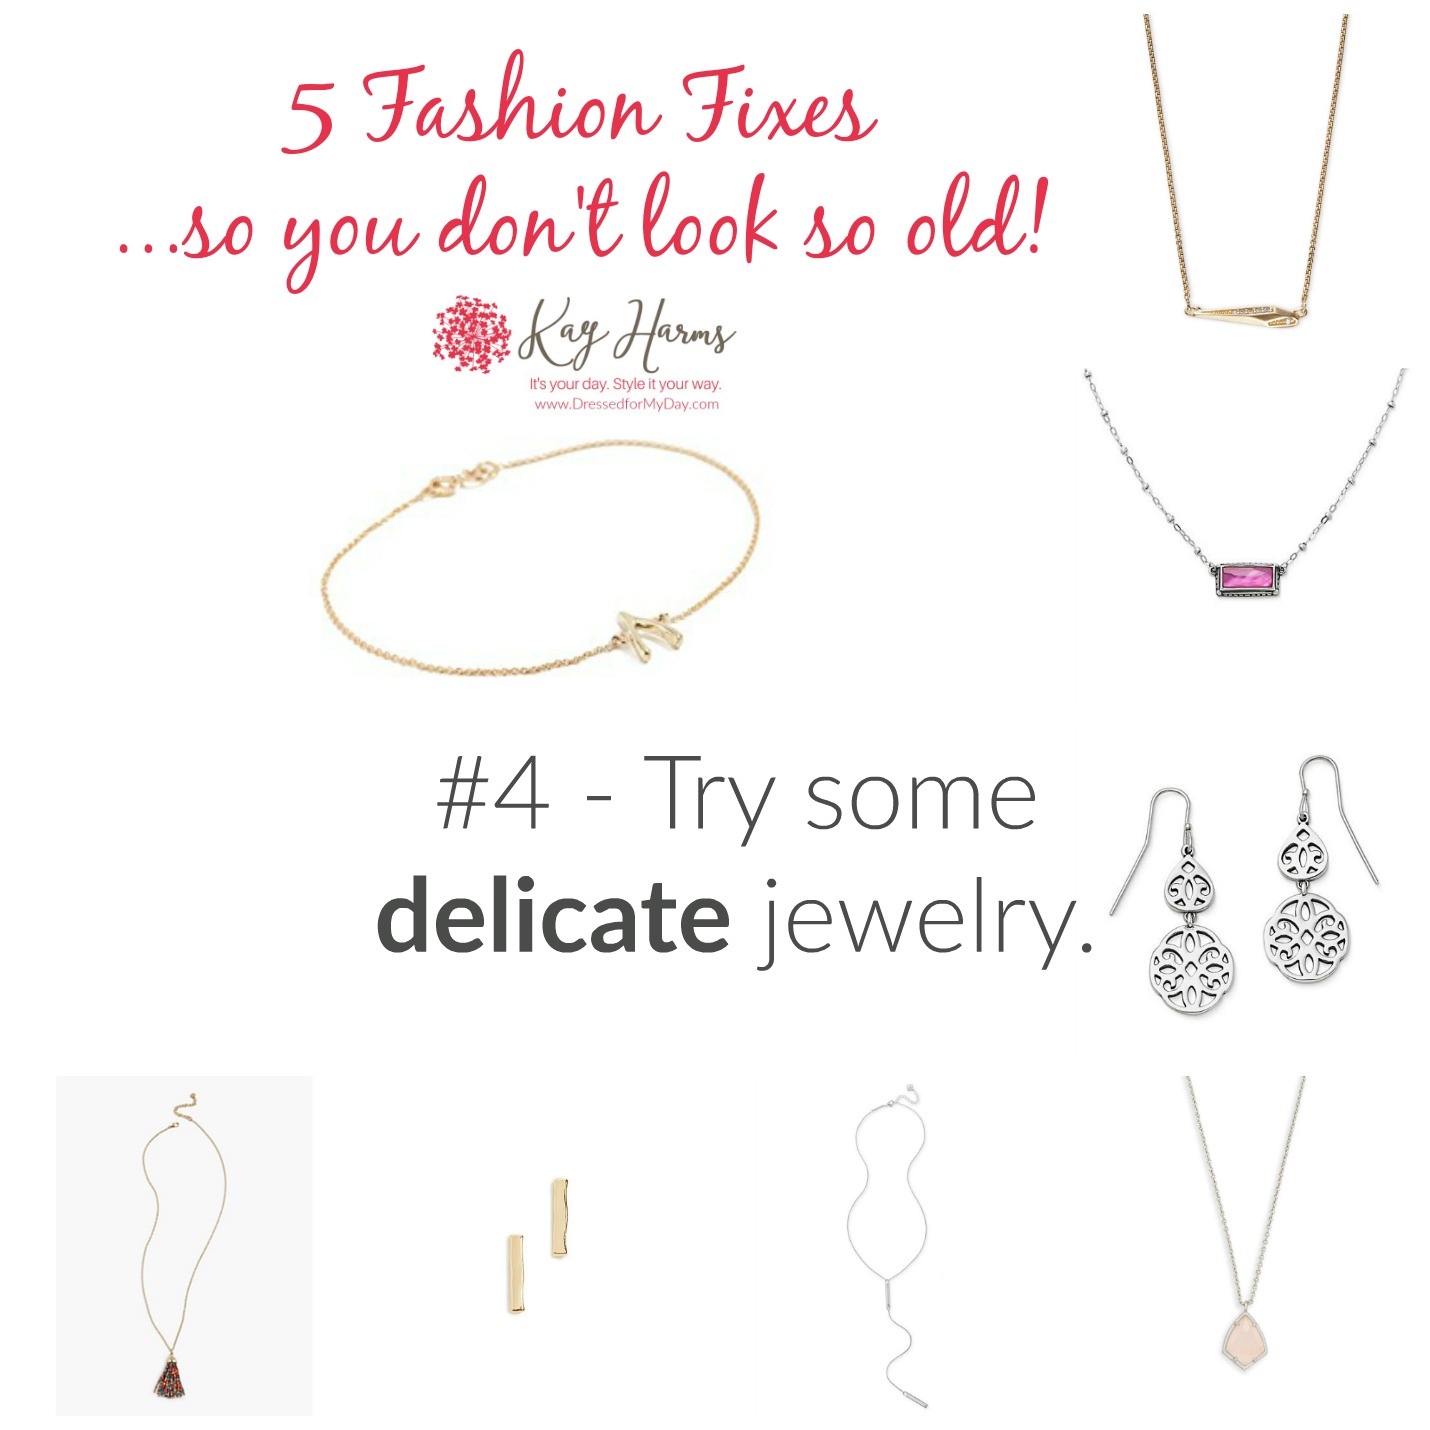 Choose delicate, youthful jewelry